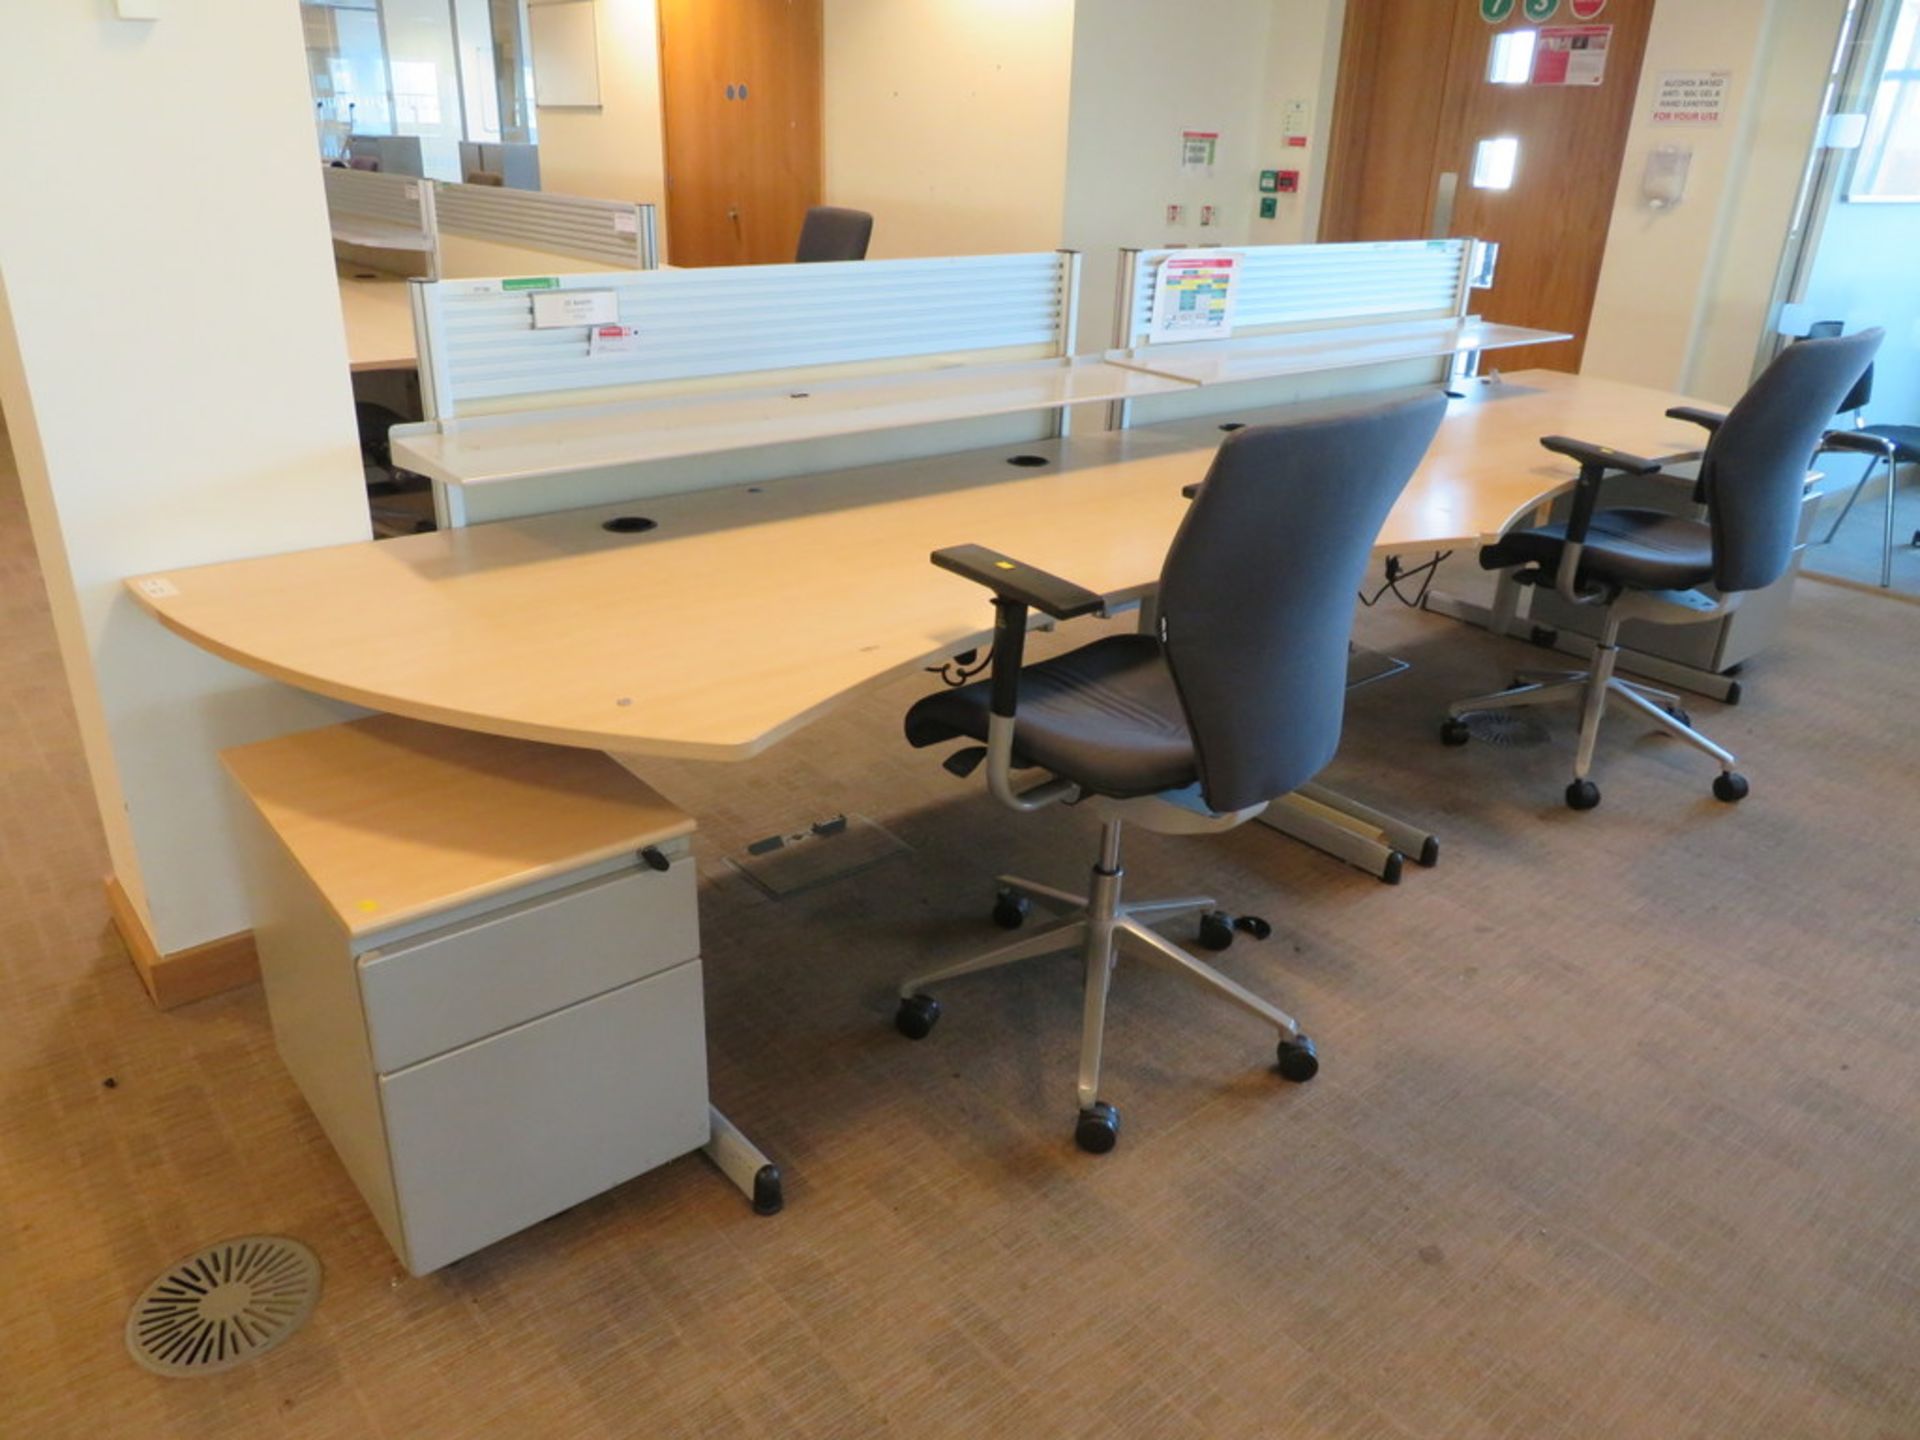 2 X LIGHTWOOD EFFECT CURVED FRONT OFFICE DESKS WITH DIVIDERS, 2 X SWIVEL